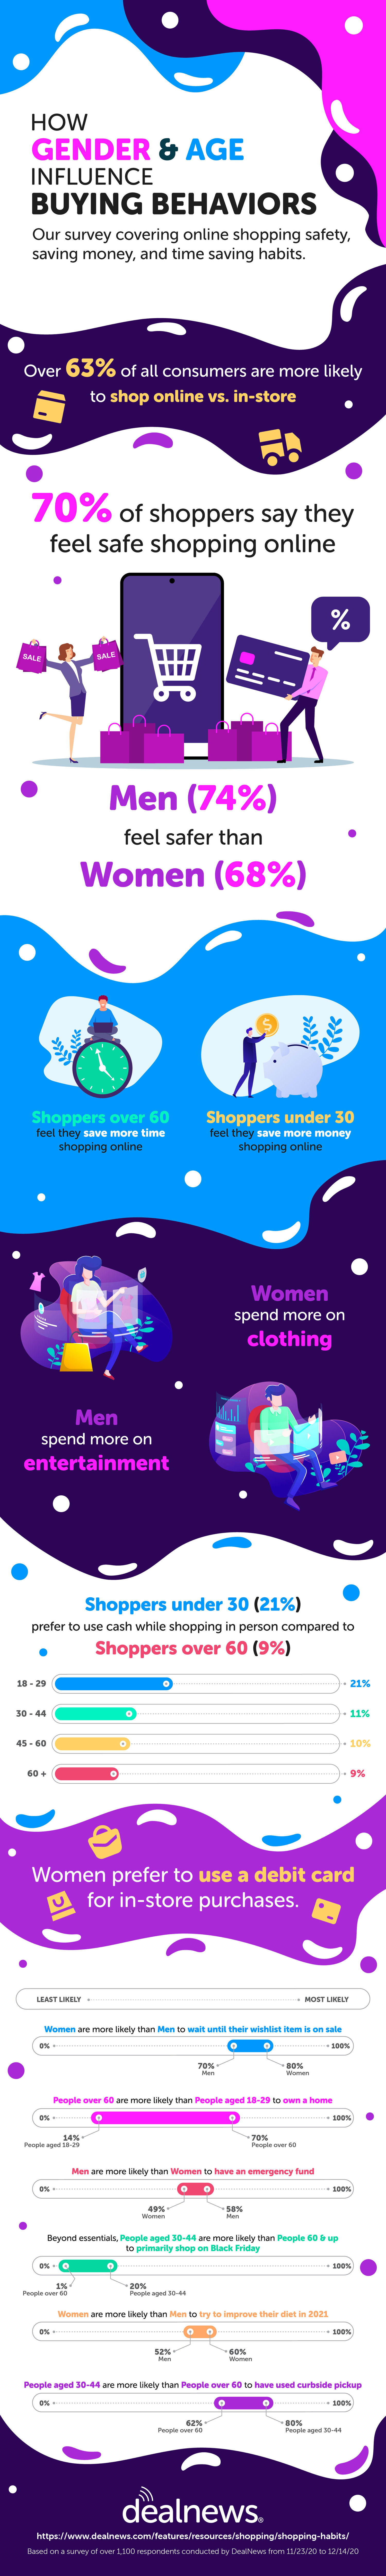 gender and age shopping habits infographic